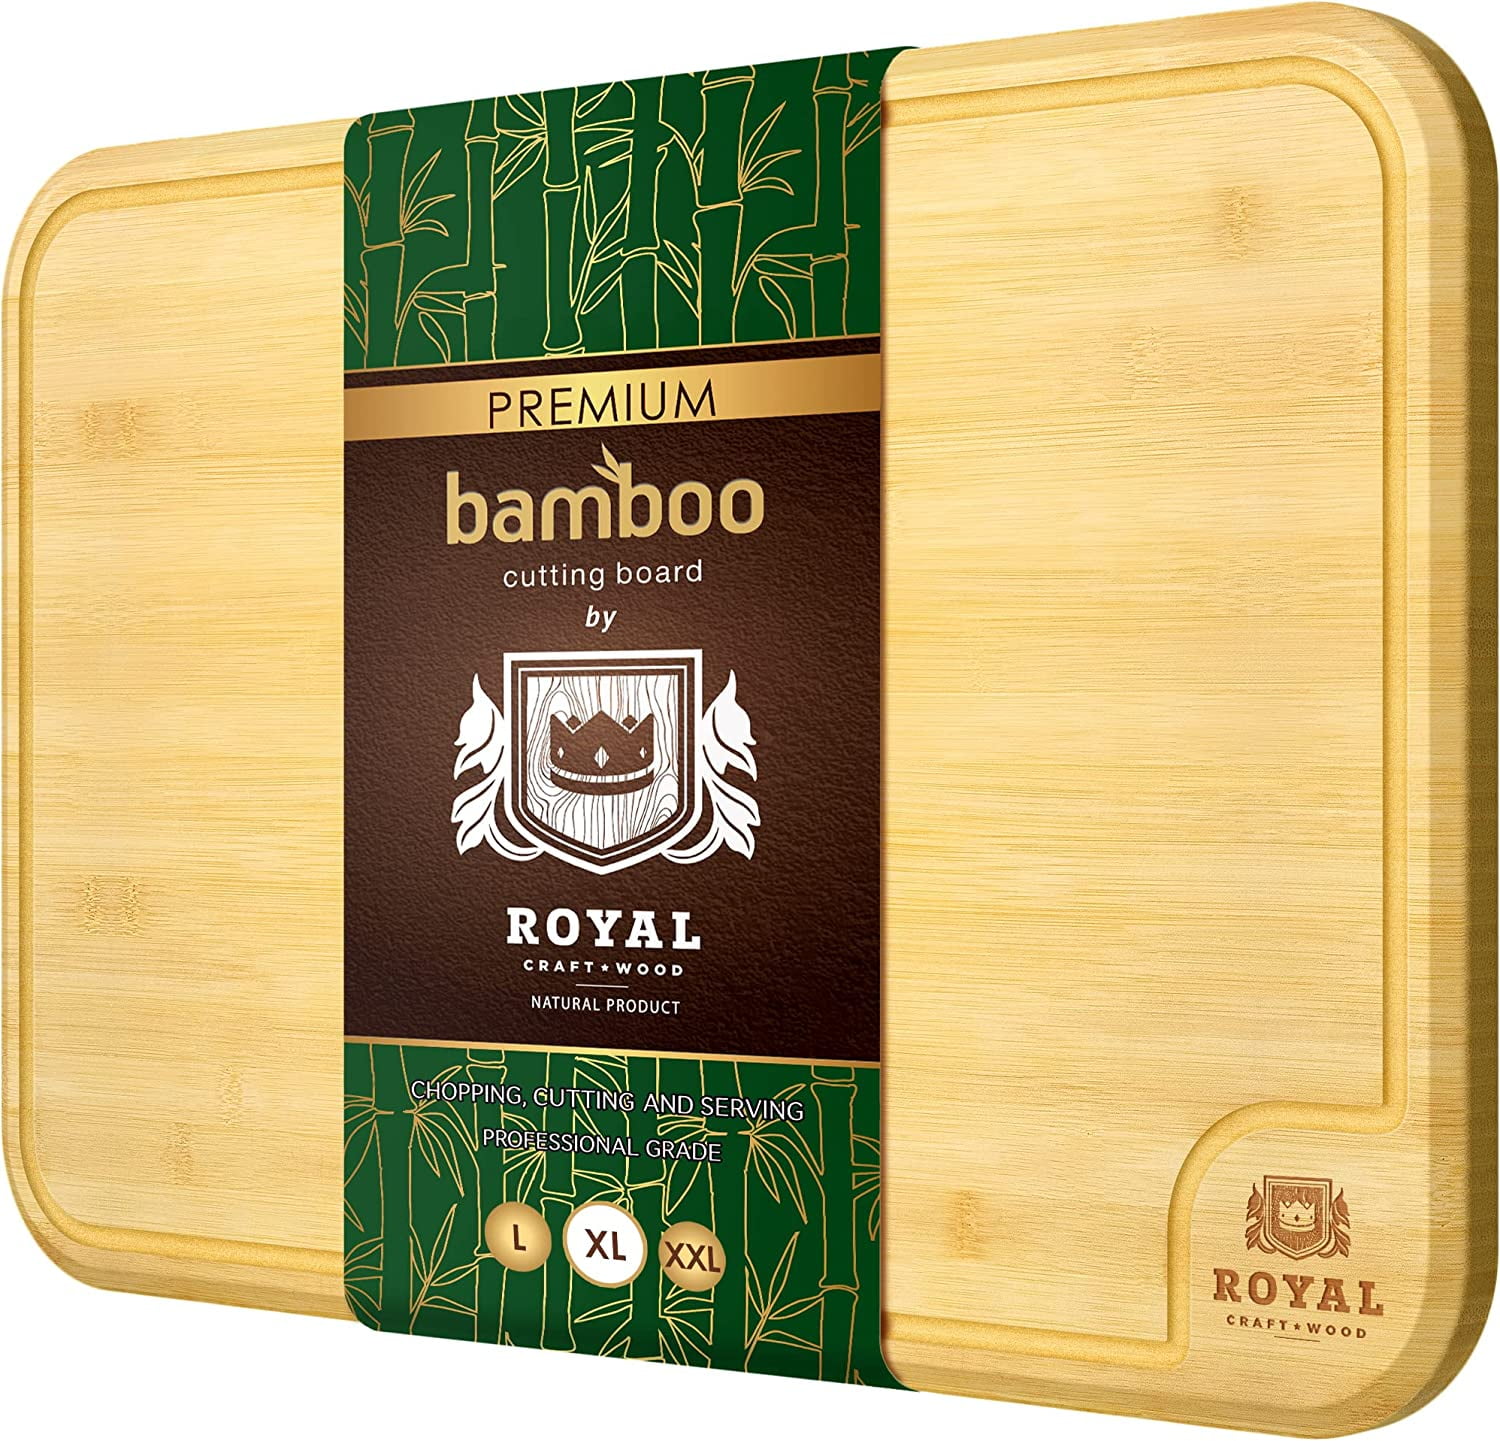 Cutting Boards: Organic Bamboo Cutting Board with Juice Grooves